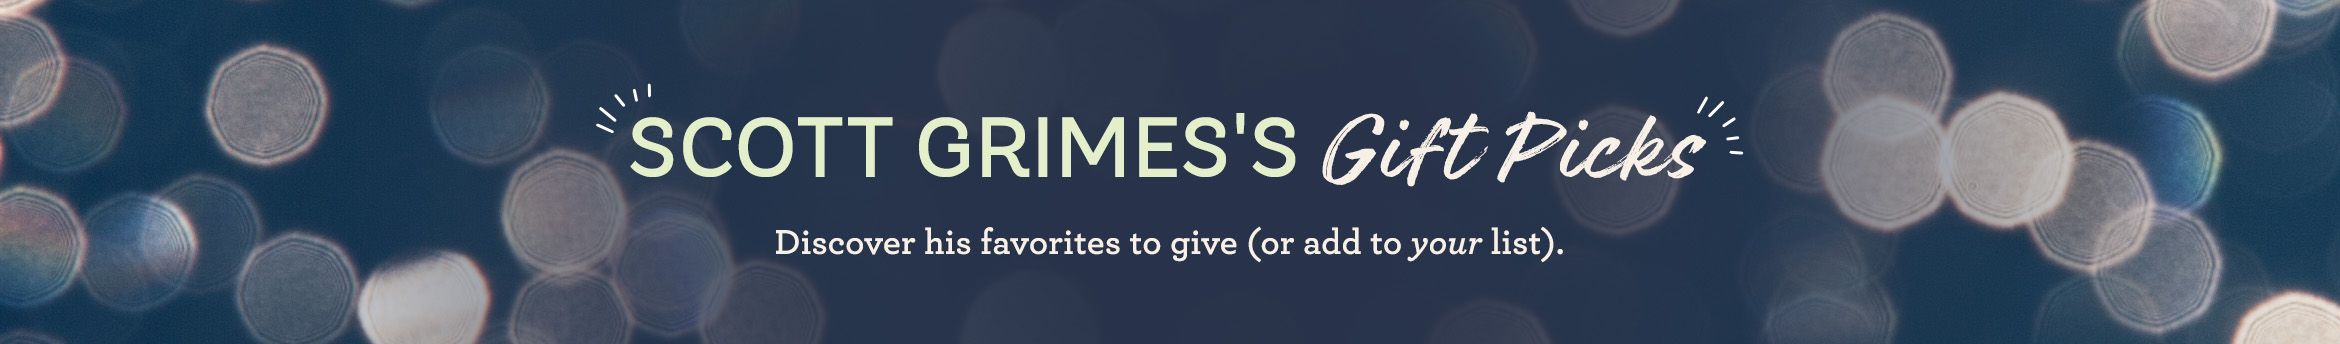 Scott Grimes's Gift Picks Discover his favorites to give (or add to your list).